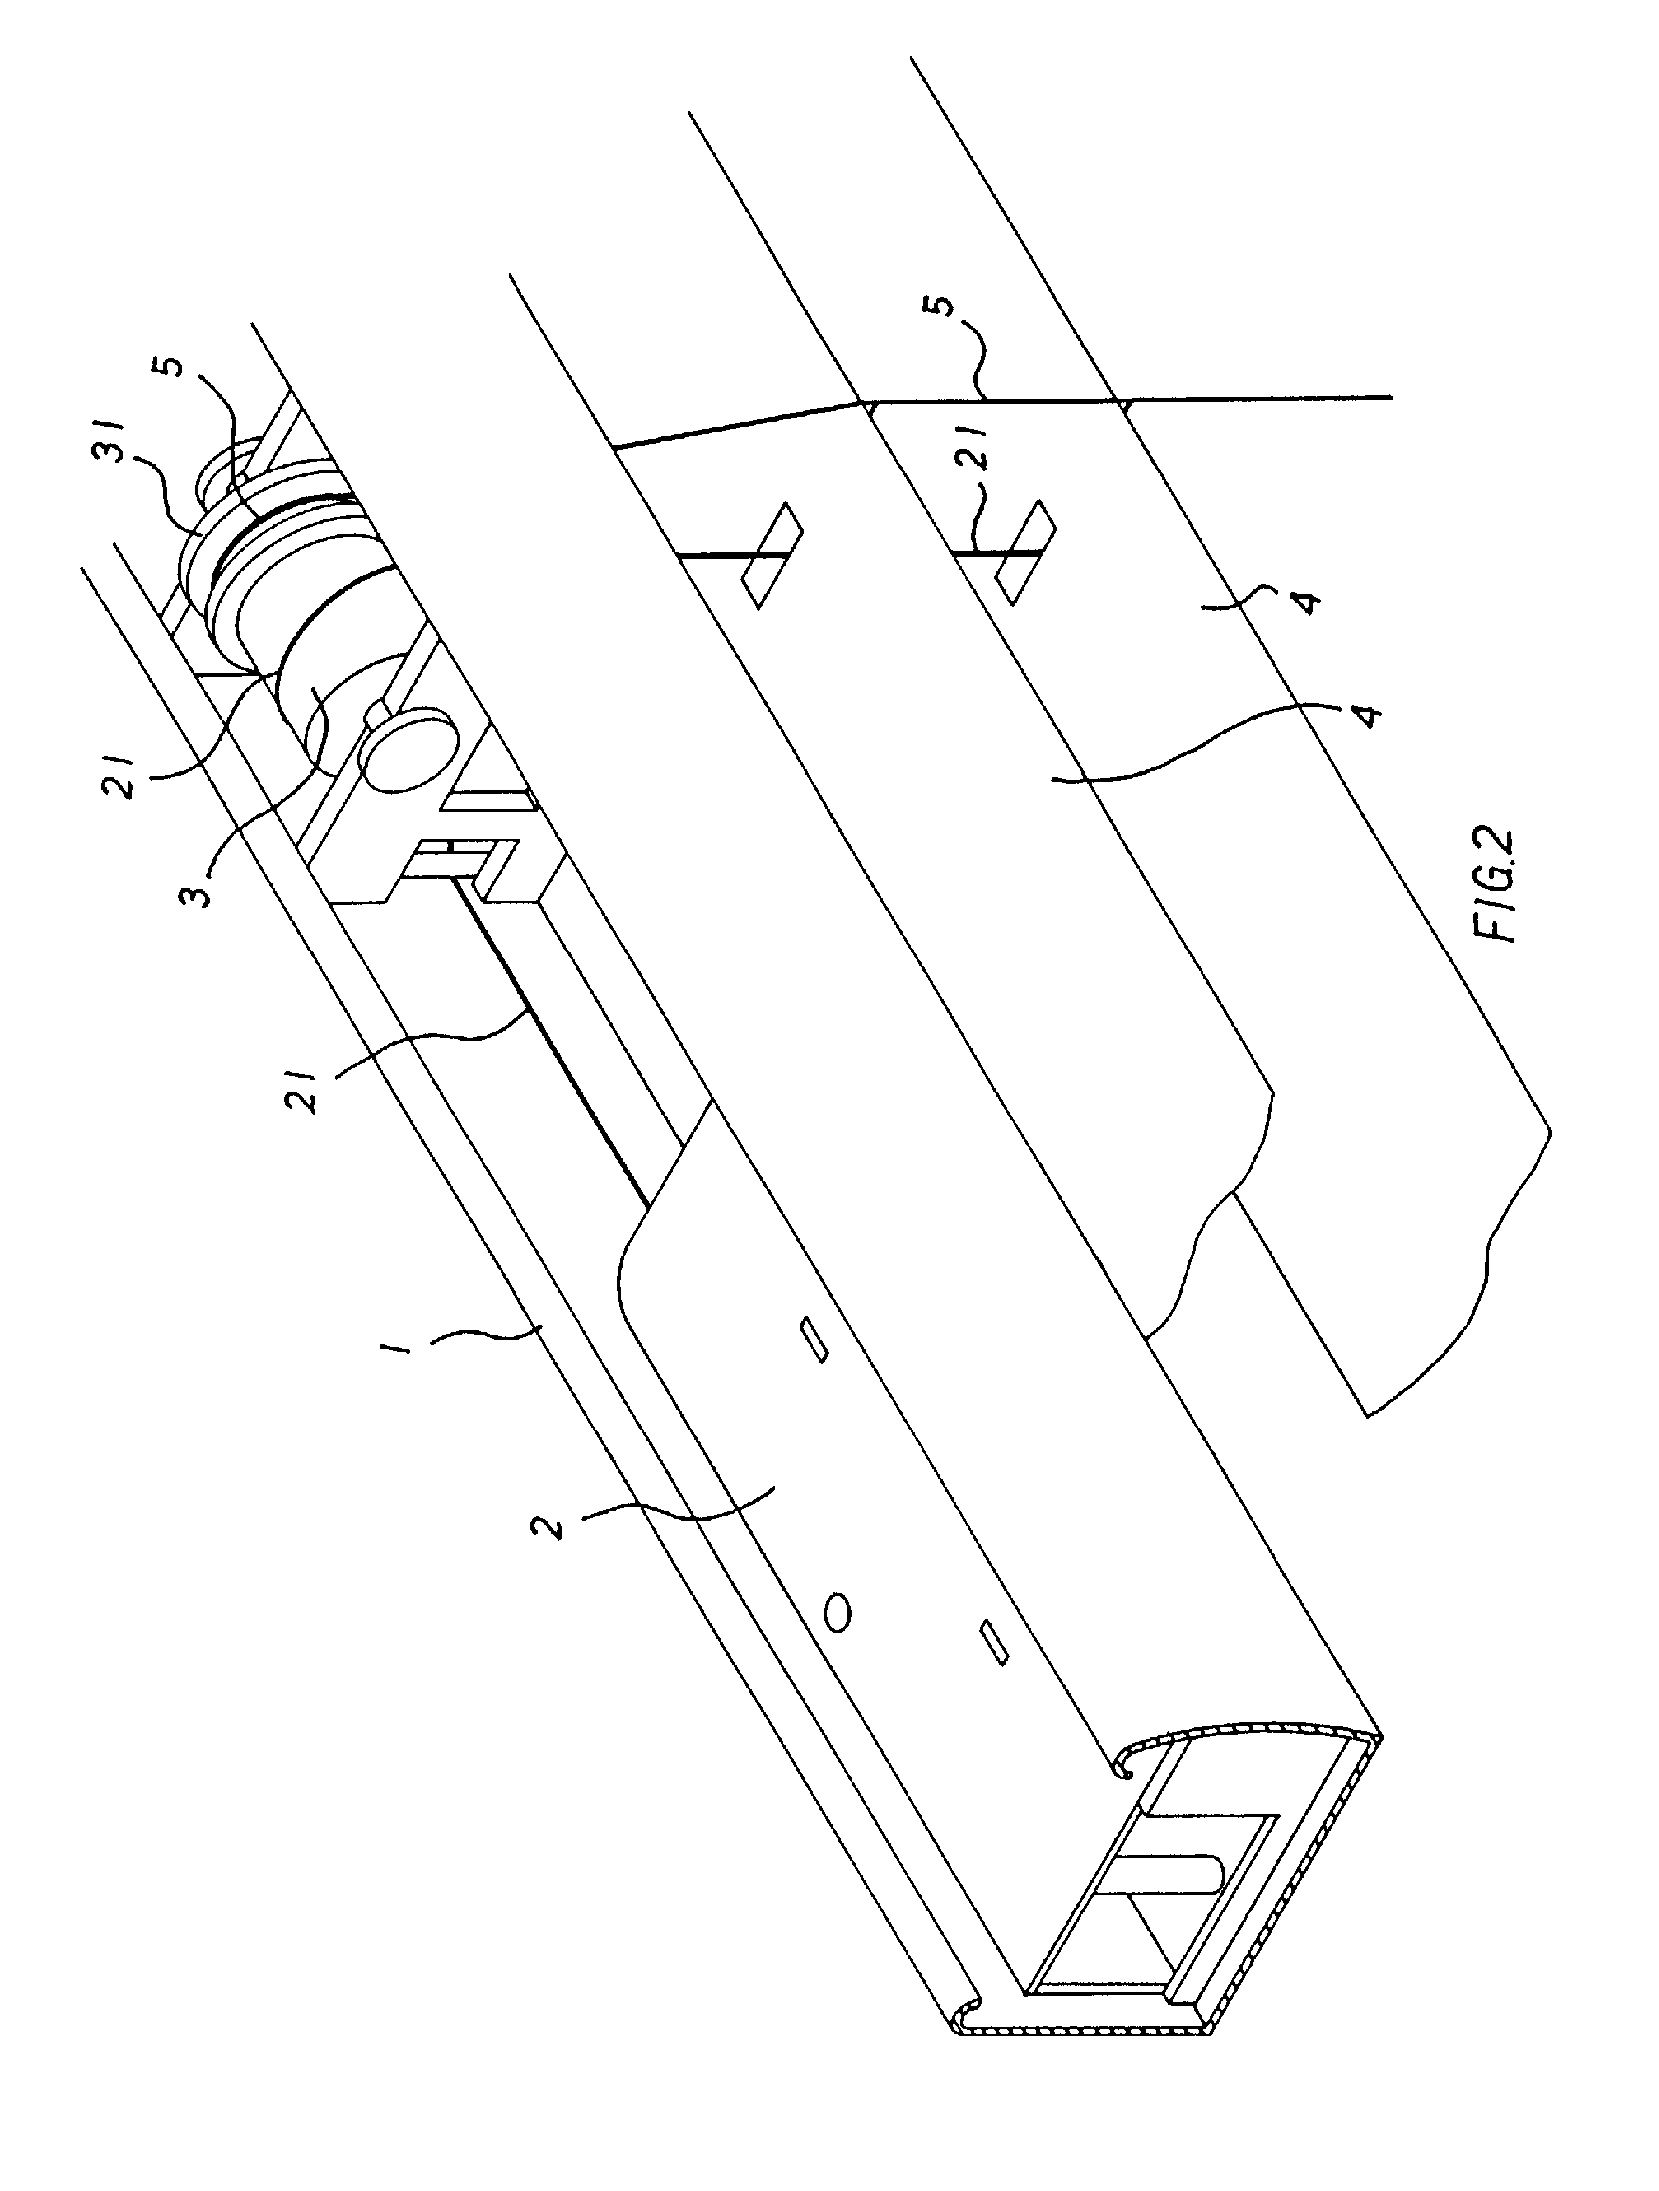 Adjusting structure of a curtain for adjusting the angle of curtain blade